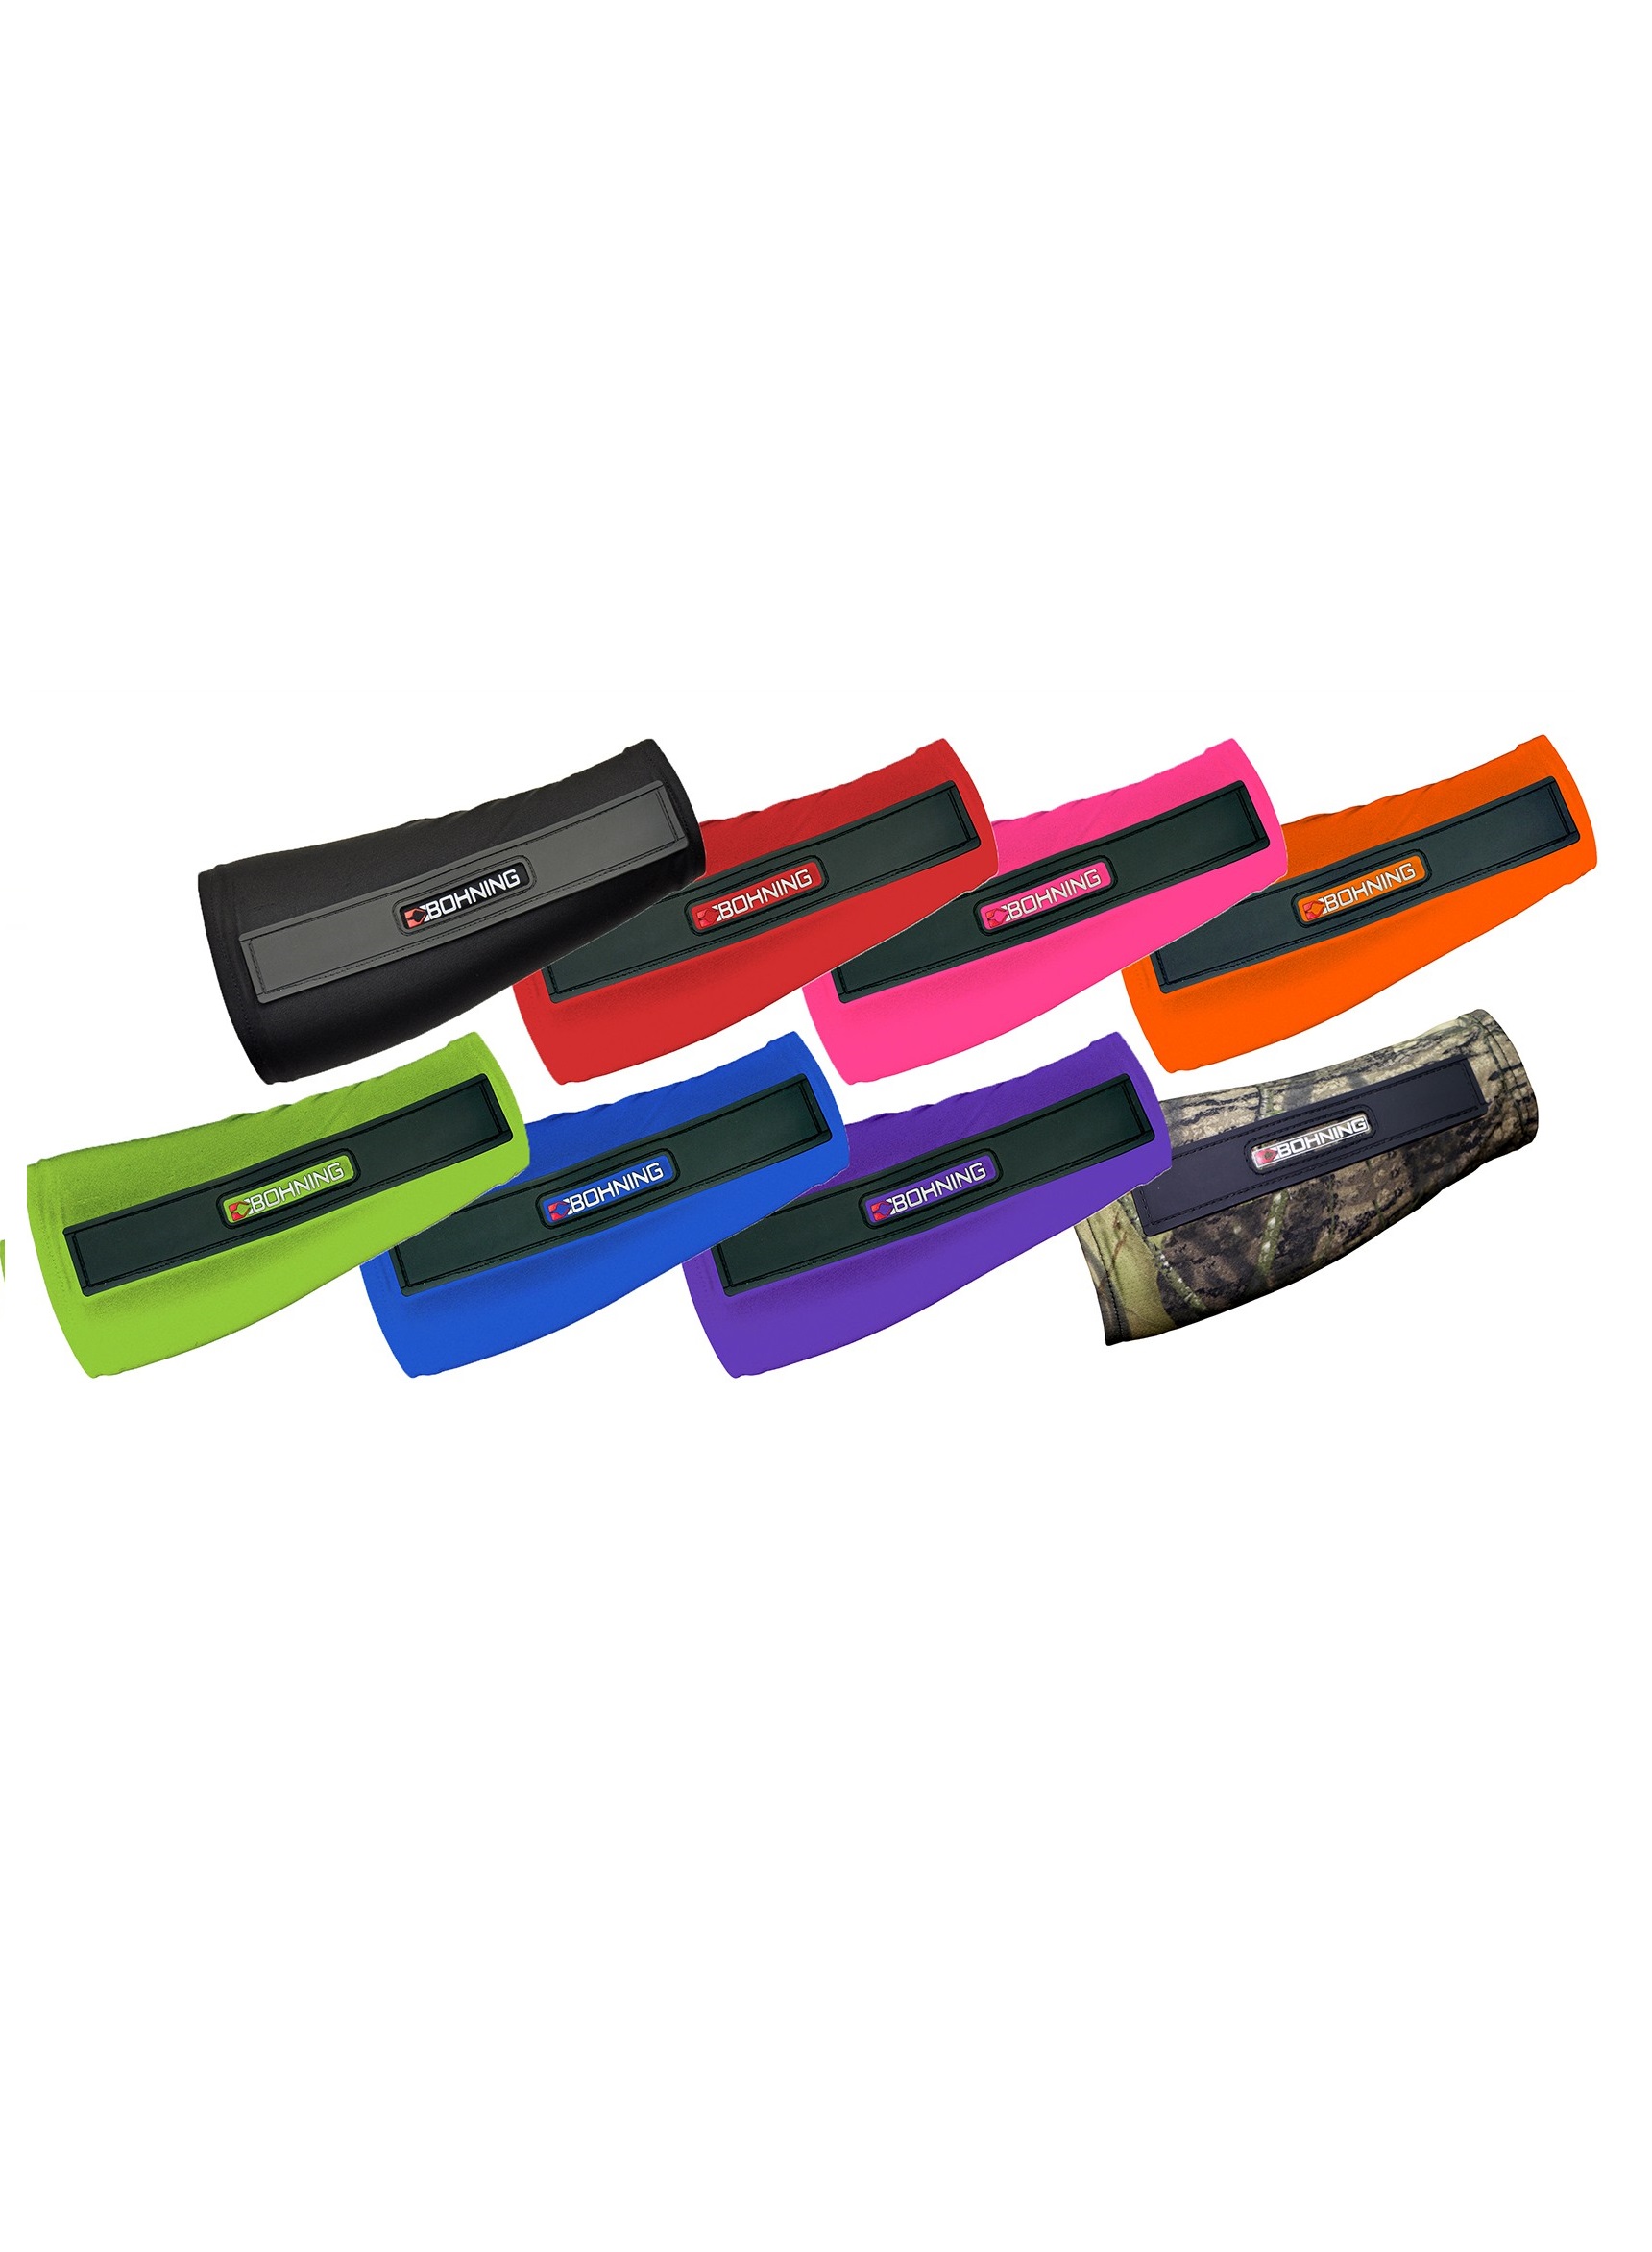 Bohning Slip-On Armguard Nylon Available in 8 Colors Small/Medium/Large/X-Large 